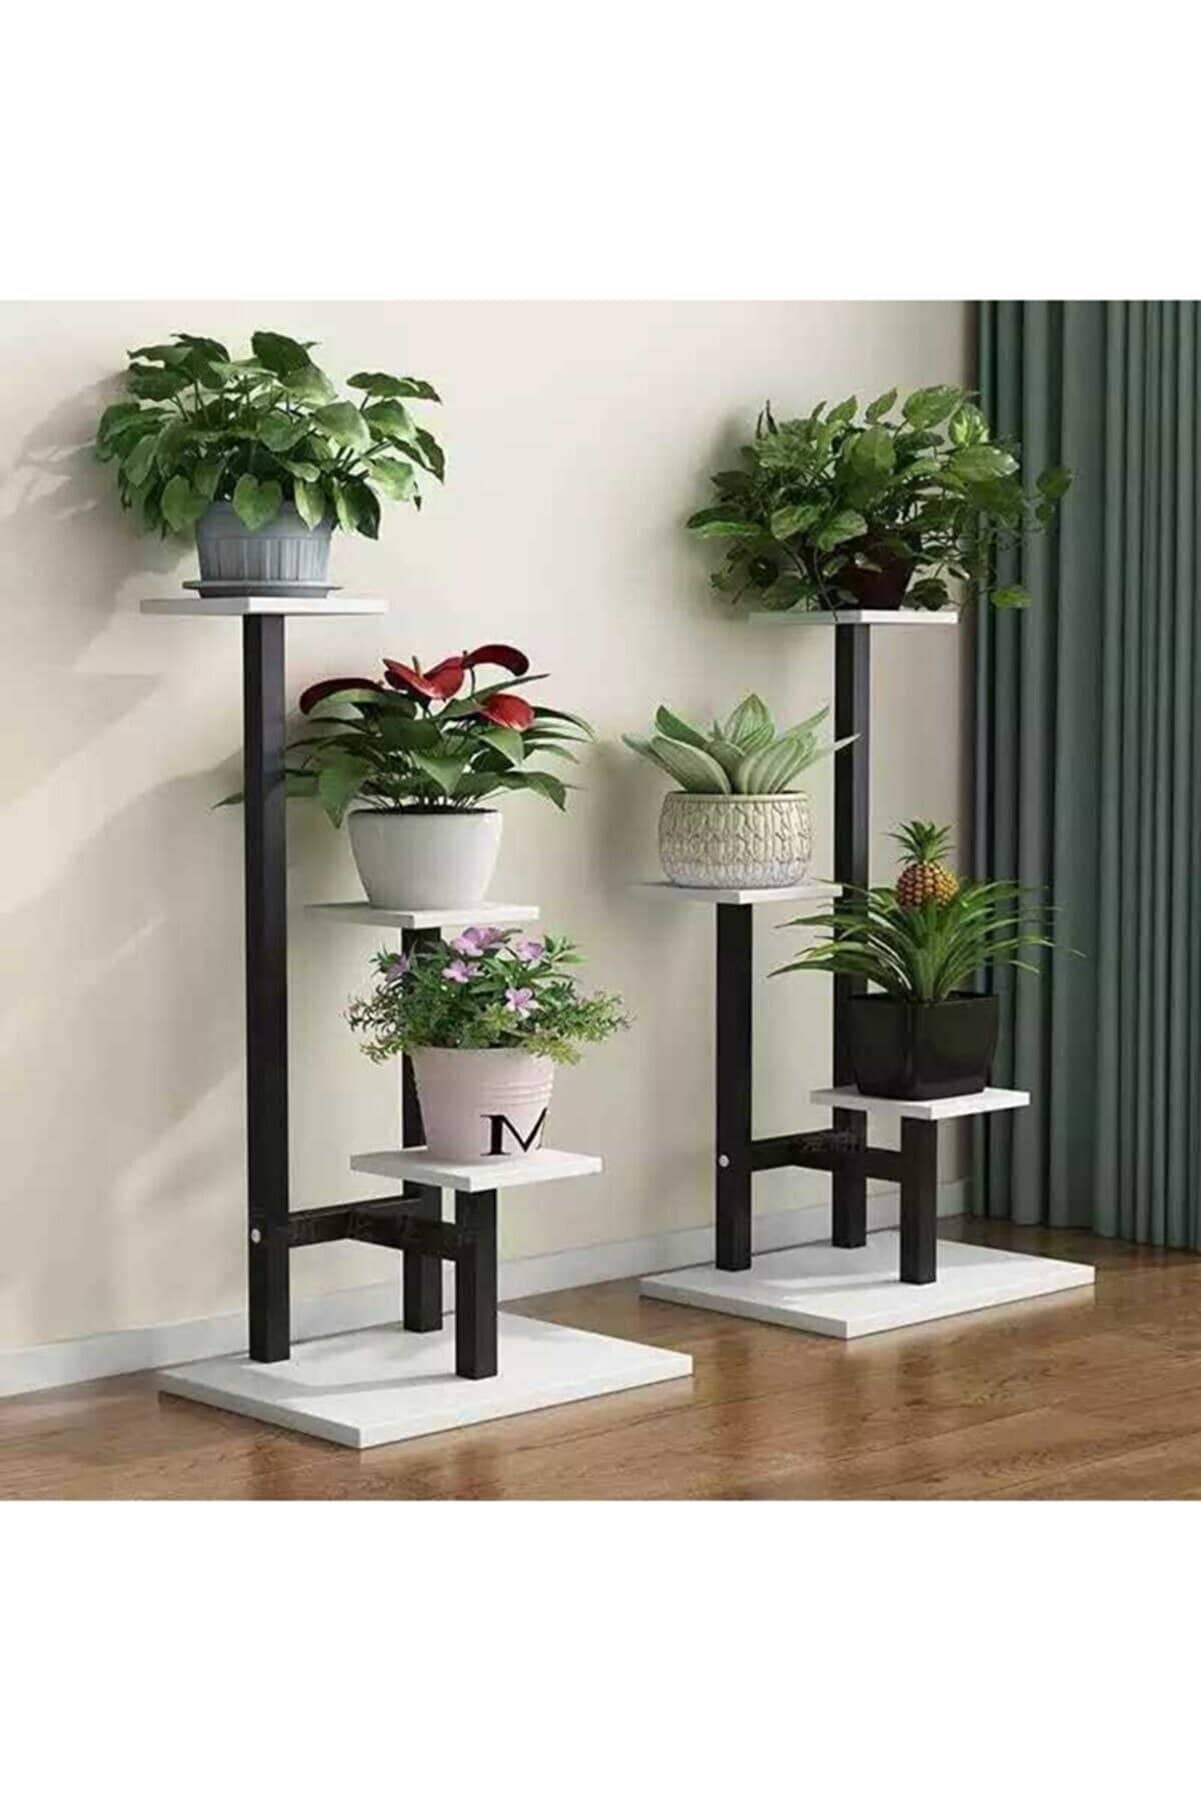 MyGift Large Black Metal Freestanding Scrollwork French Trolley Cart Plant Stand w/ 4 Hanging Flower Pot Baskets 